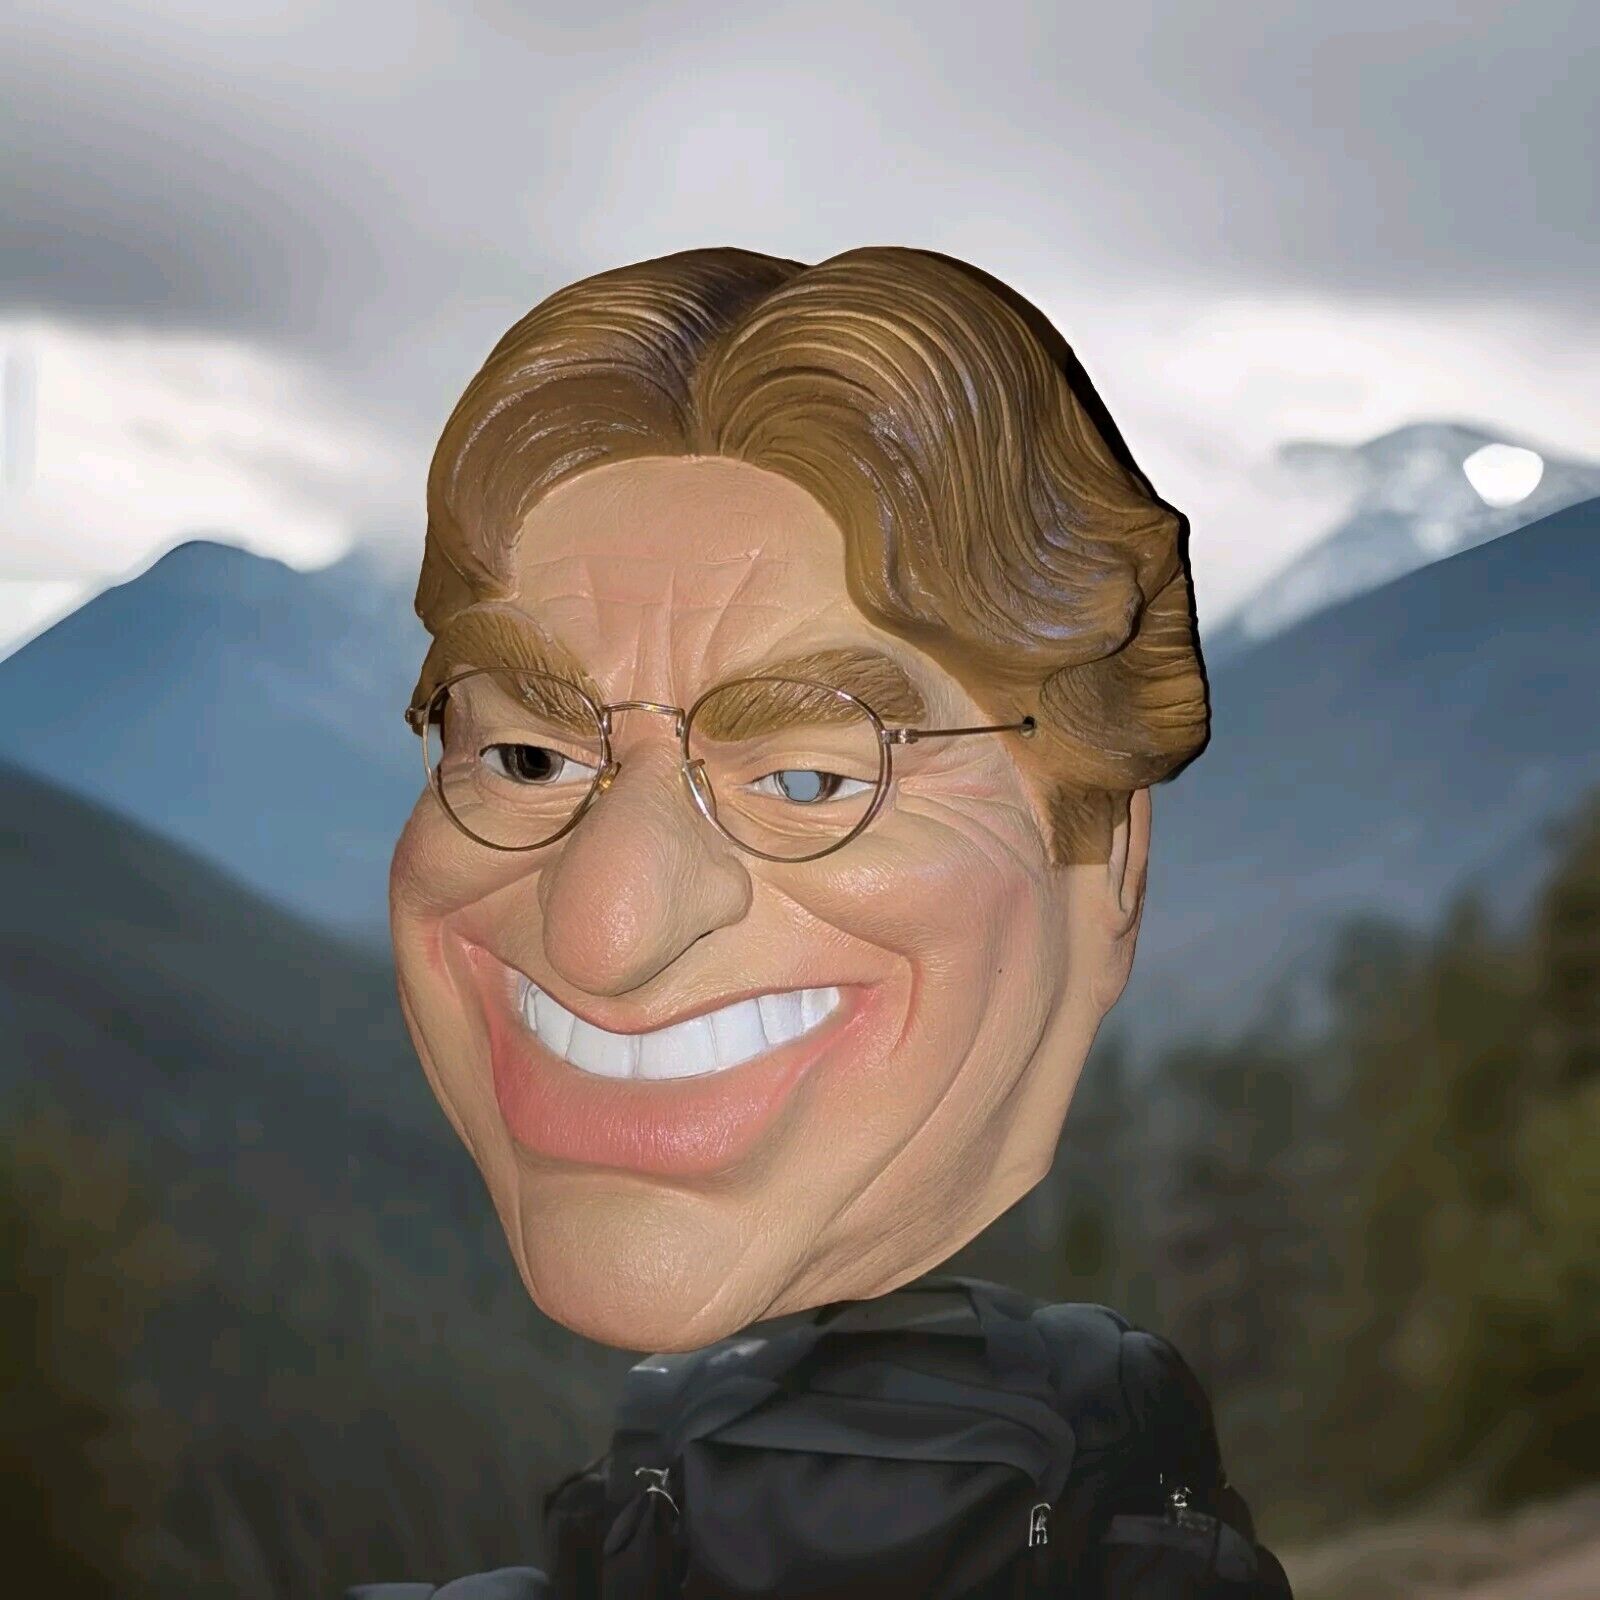 Halloween Mask Cesar Jerry Springer RARE Mask 1999 Caricature with Glasses. 